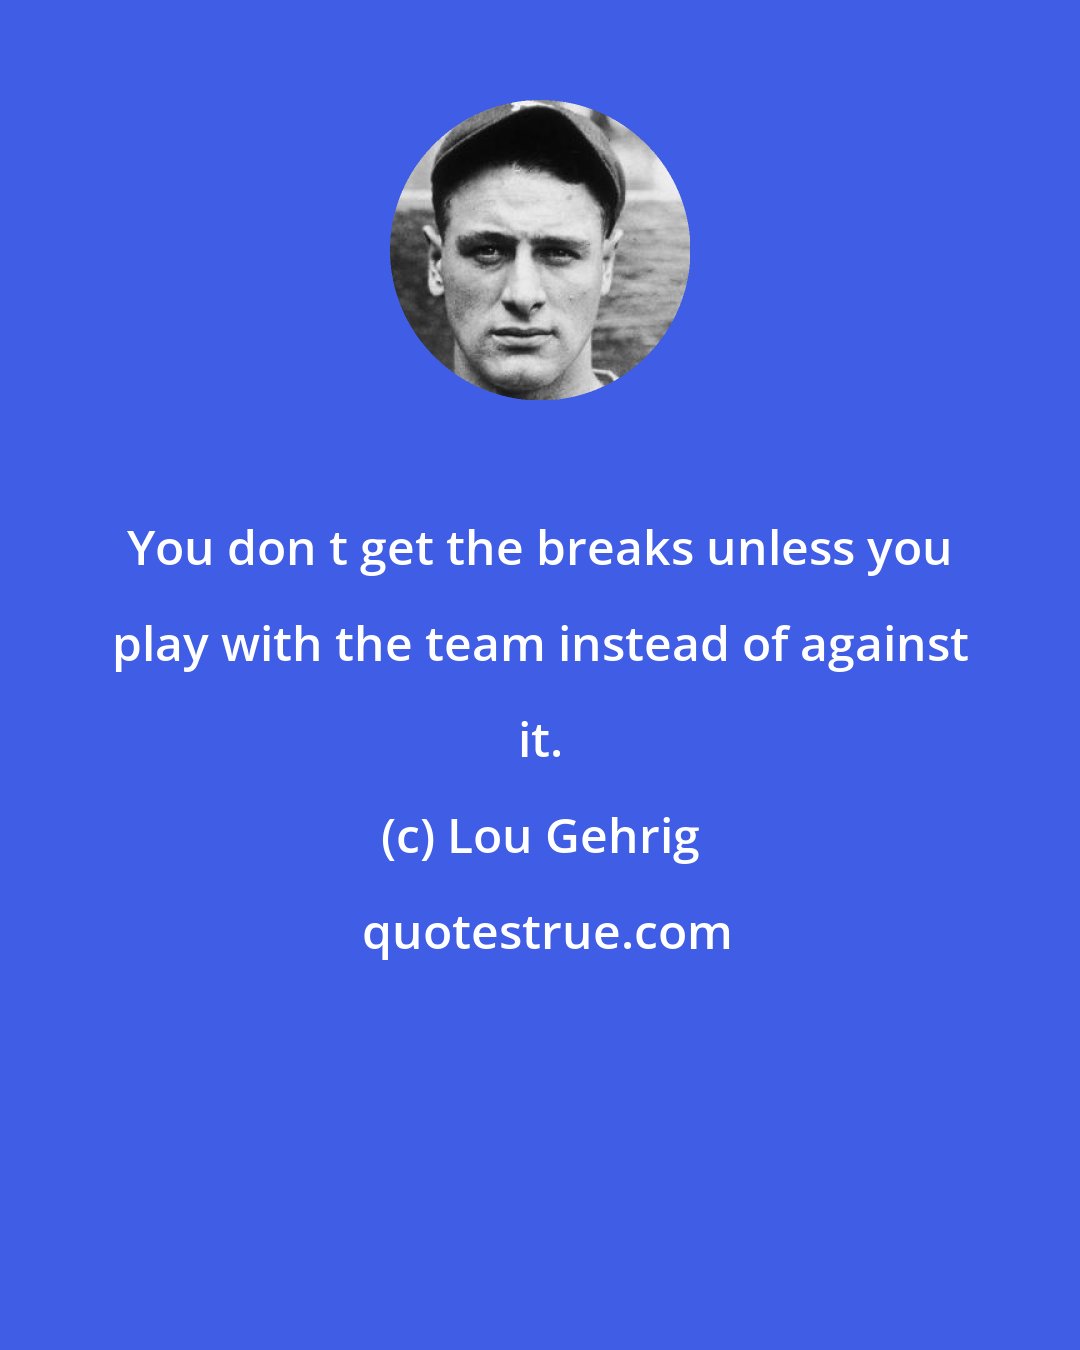 Lou Gehrig: You don t get the breaks unless you play with the team instead of against it.